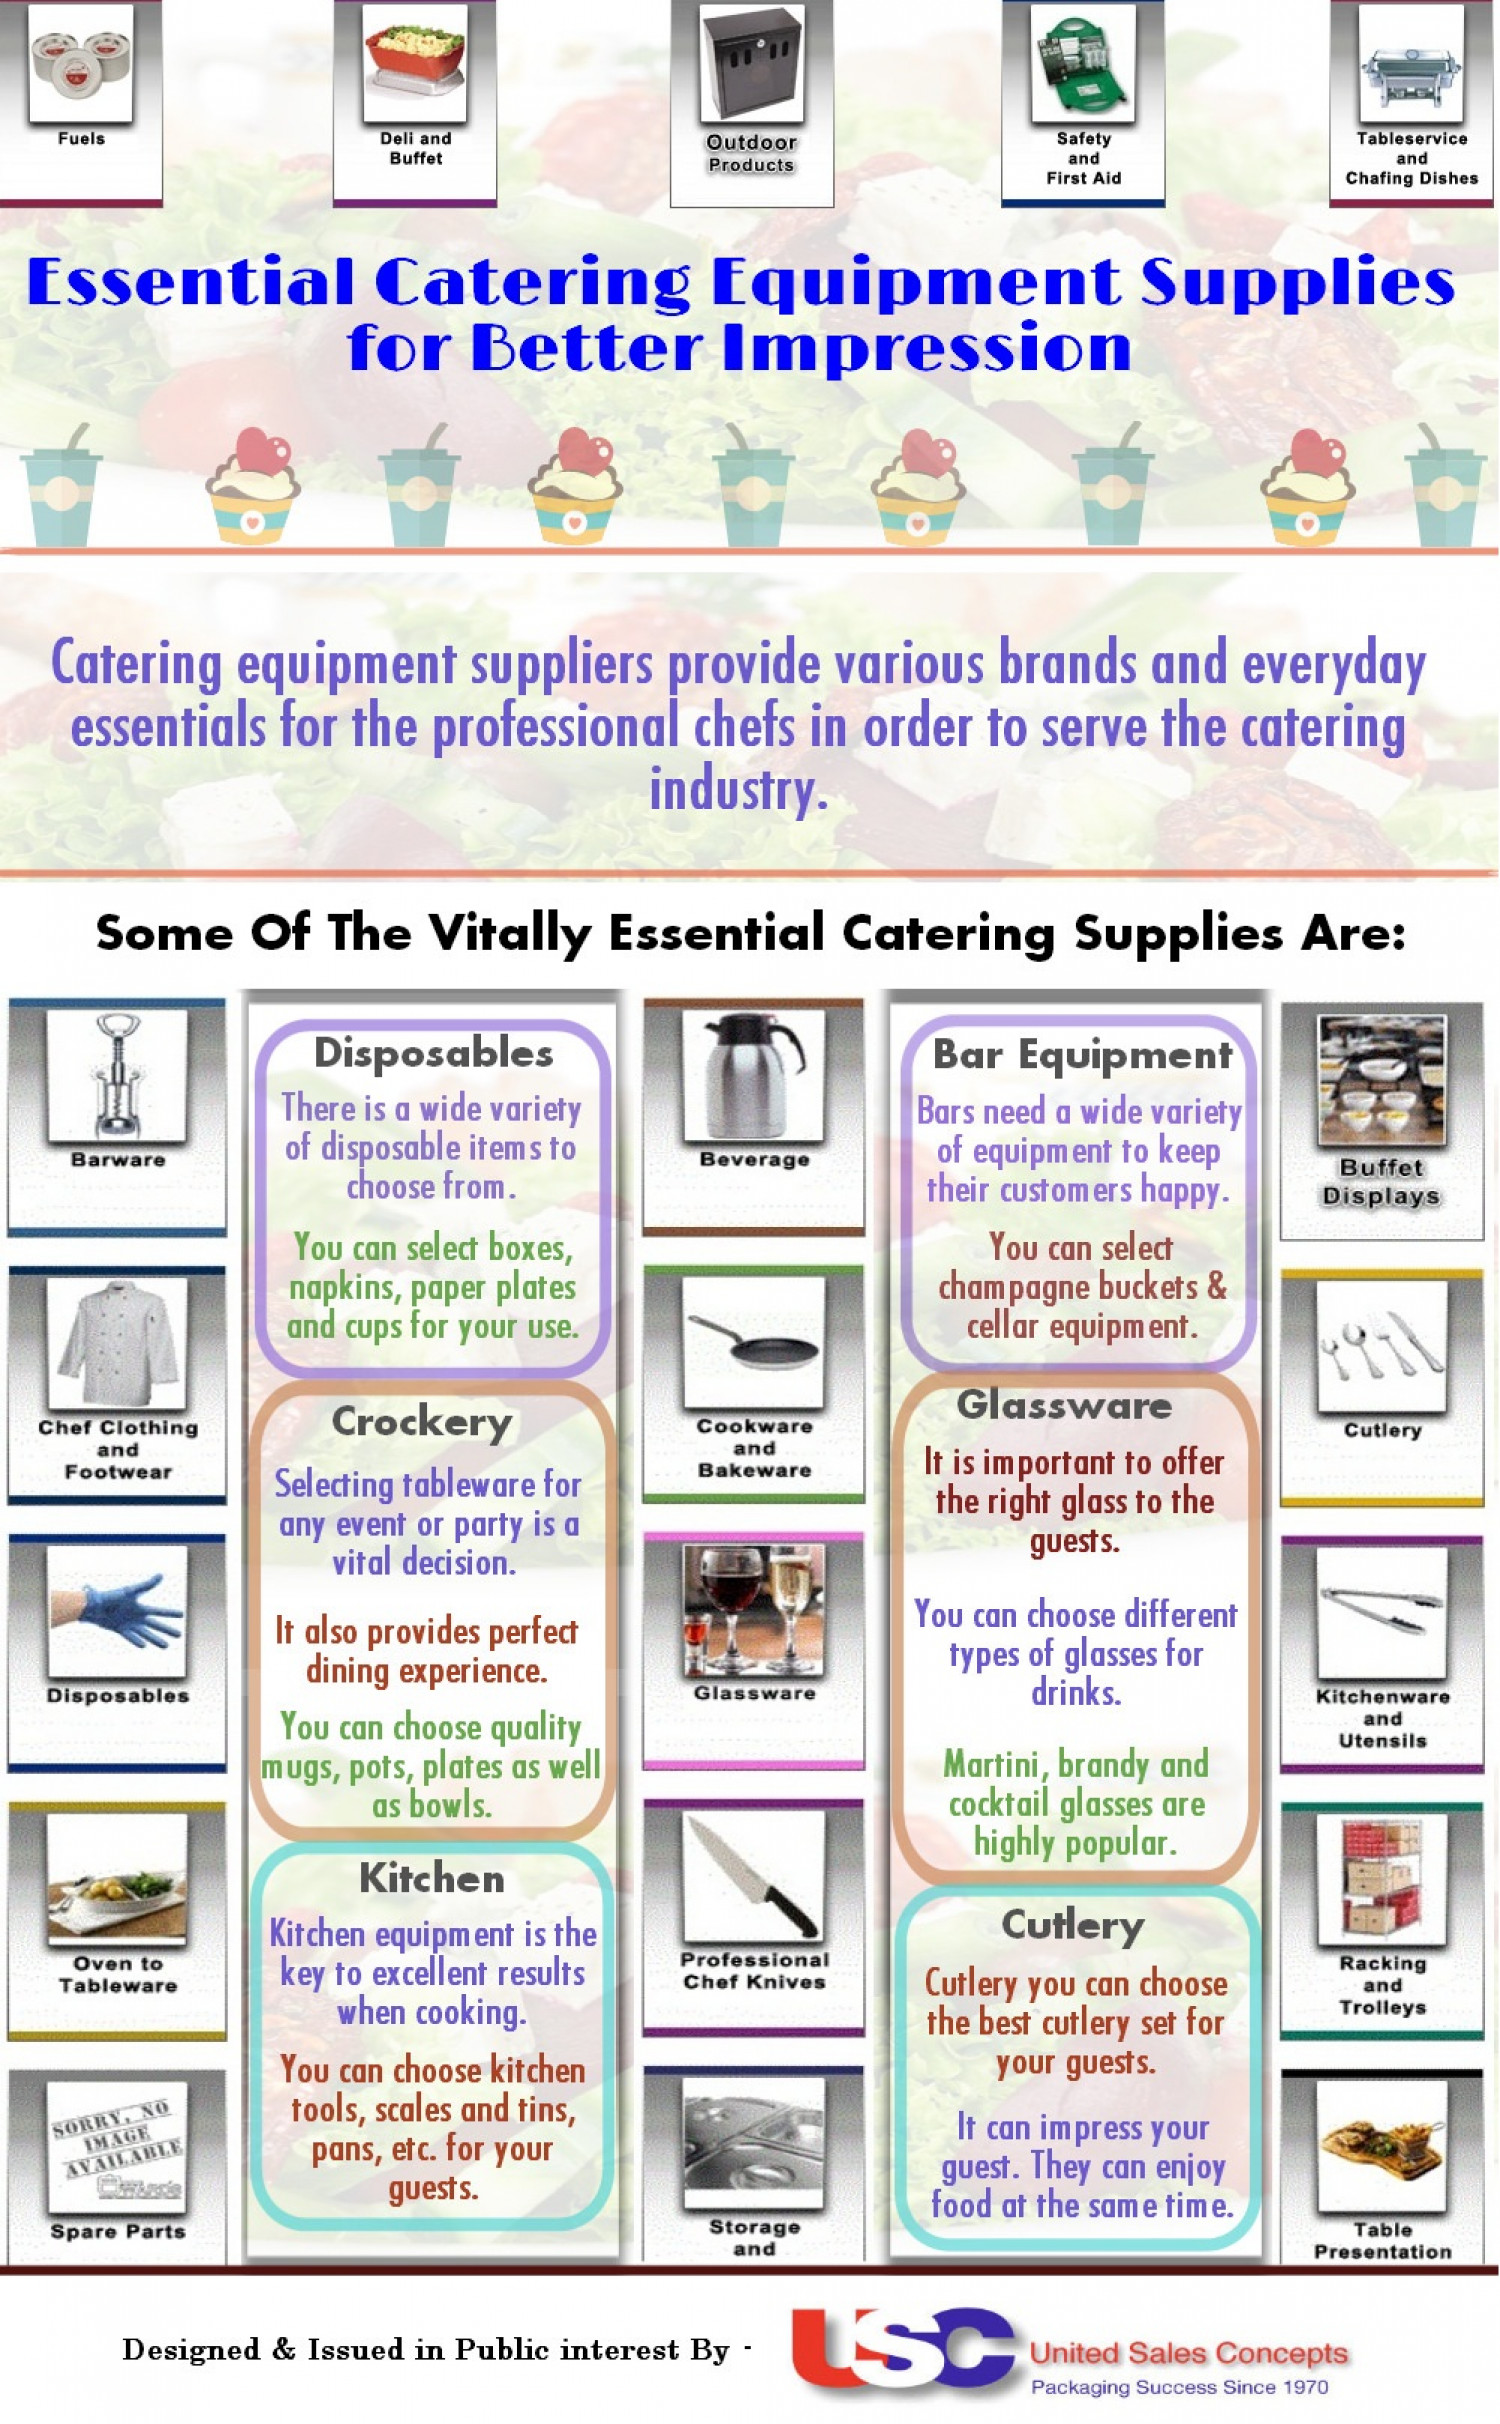 Essential Catering Equipment Supplies for Better Impression Infographic